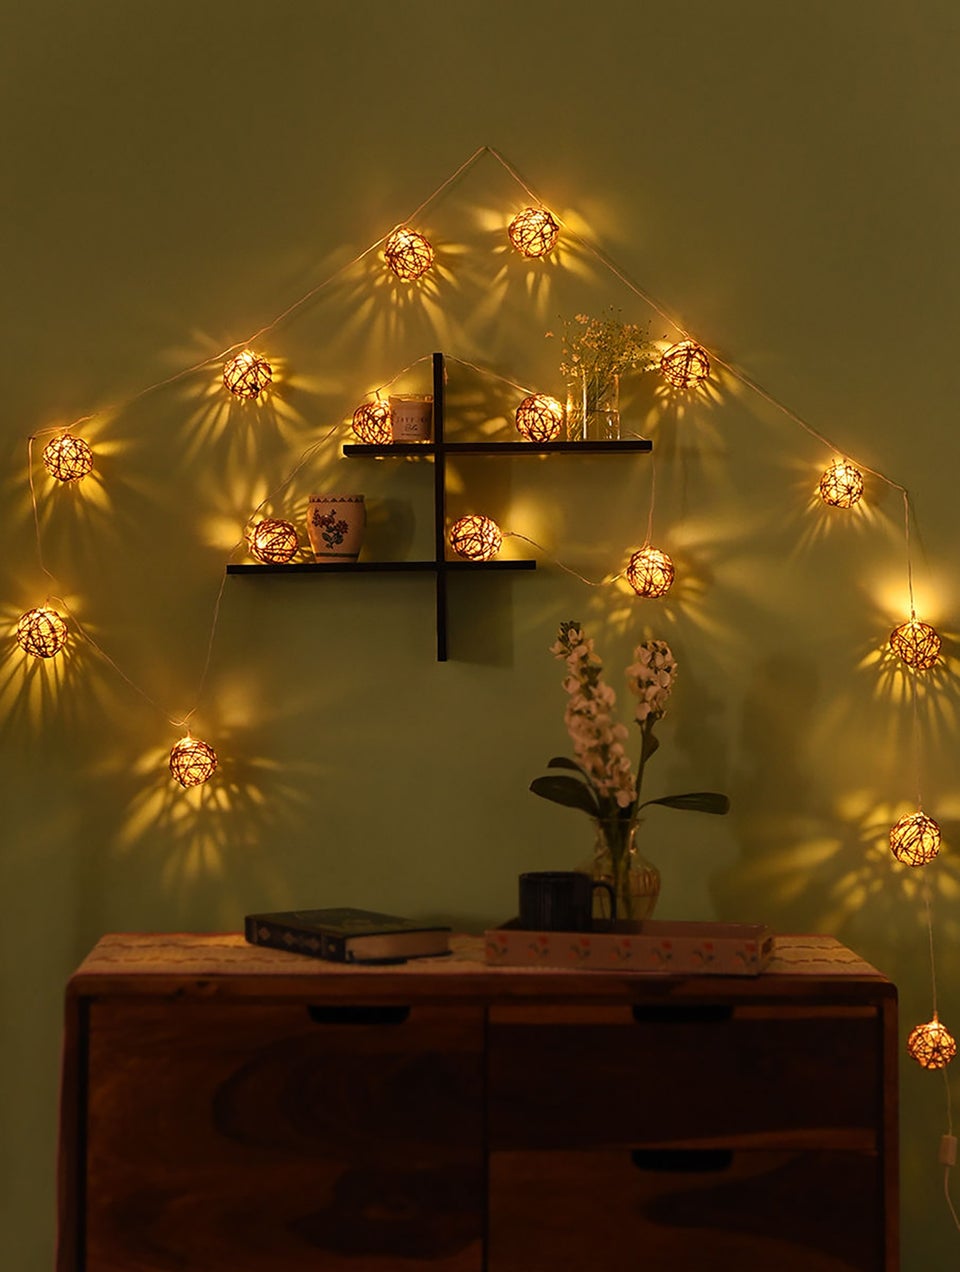 Natural Brown Decorative Jute String Light In A Gift Box